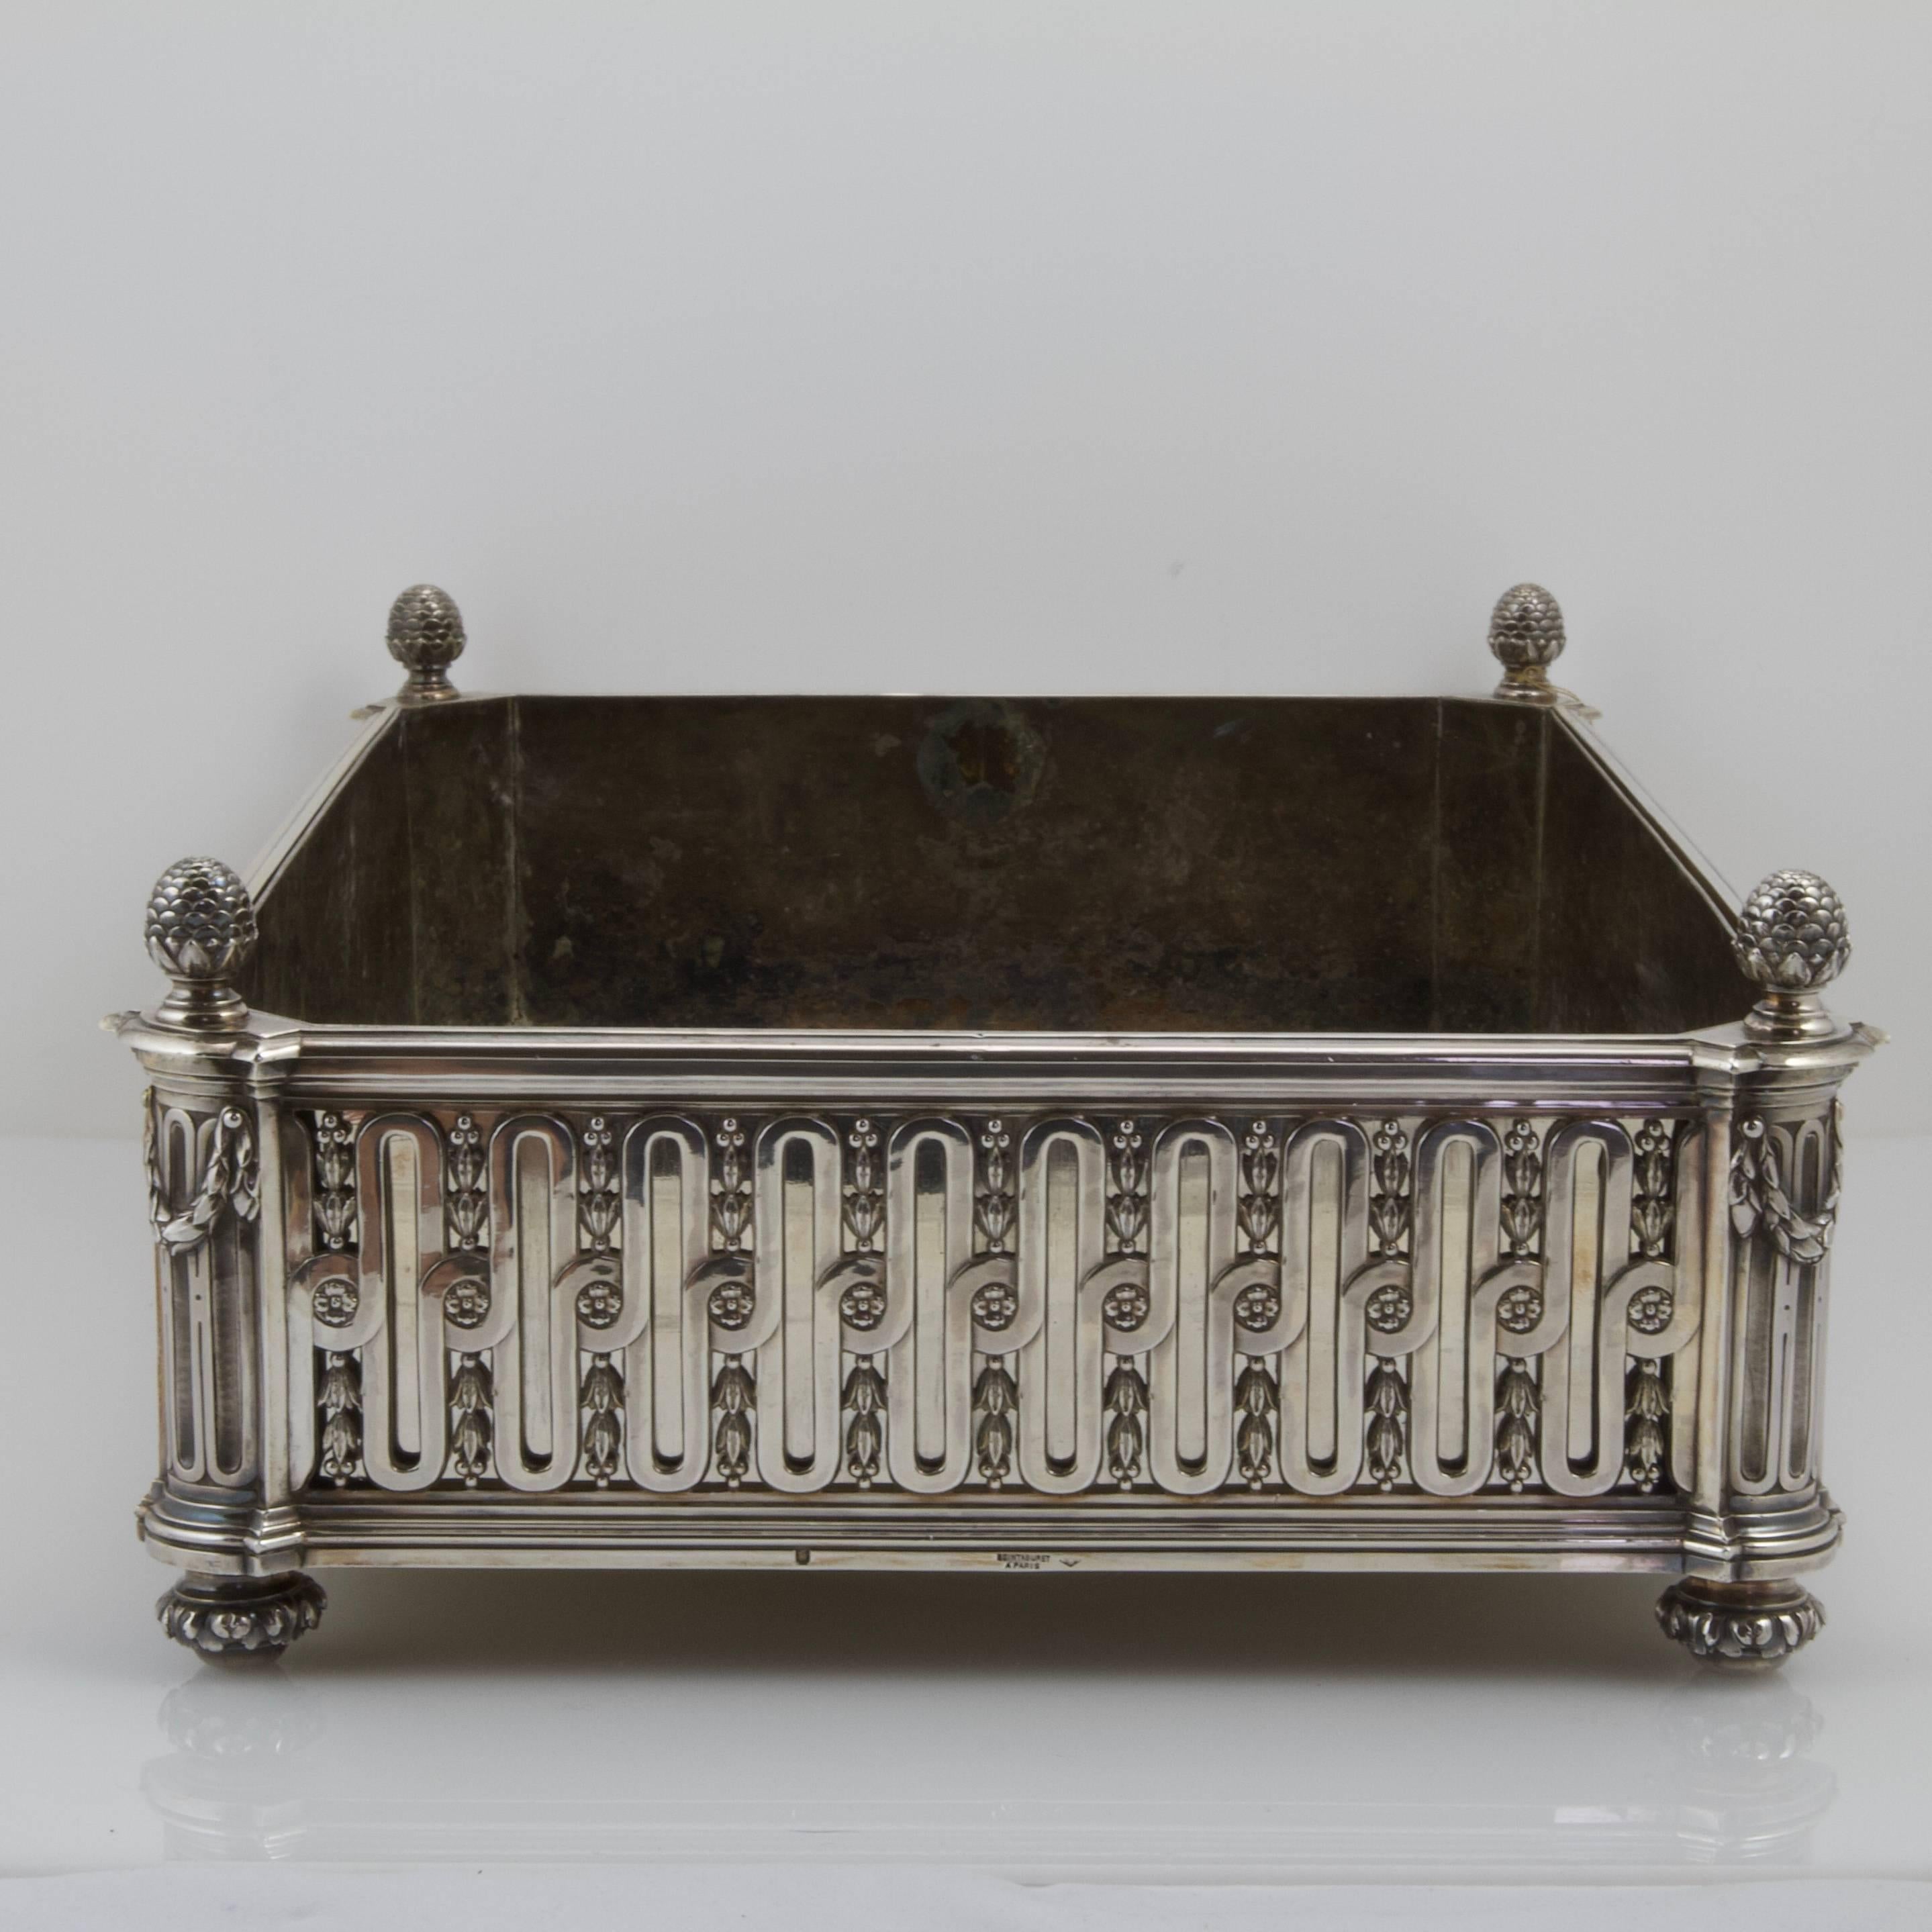 Rectangular sterling silver jardiniere entirely with a neo-classical cannelure pattern intersperced with acanthus frise. Bordered on each corner with a pine cone. Rested on four round feet decorated with acanthus leaves.
Signature and maker's mark